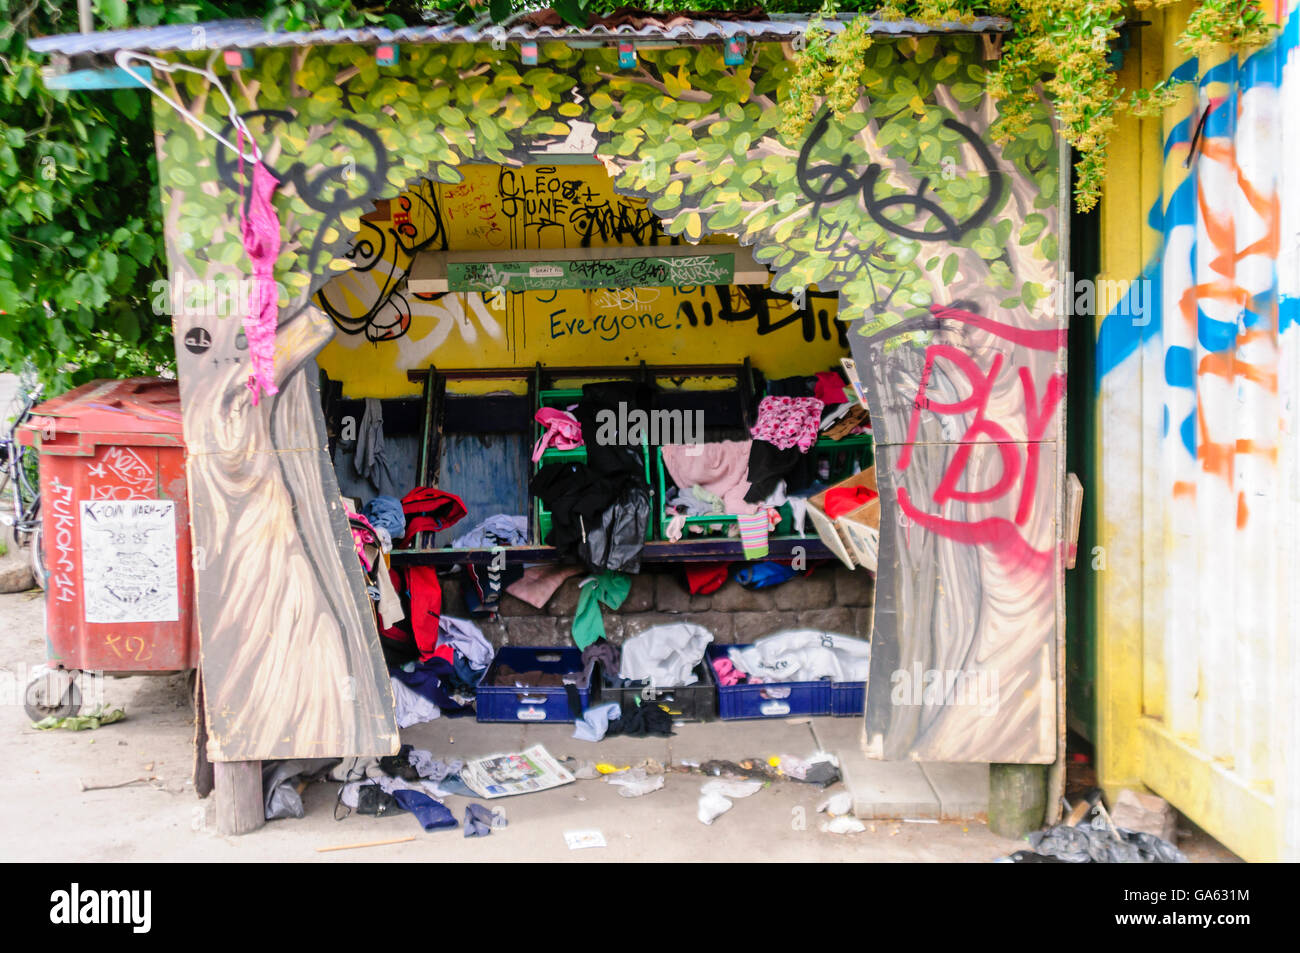 Clothes recycling centre in Freetown Christiana, Copenhagen, where residents can leave unwanted clothes for others to use. Stock Photo